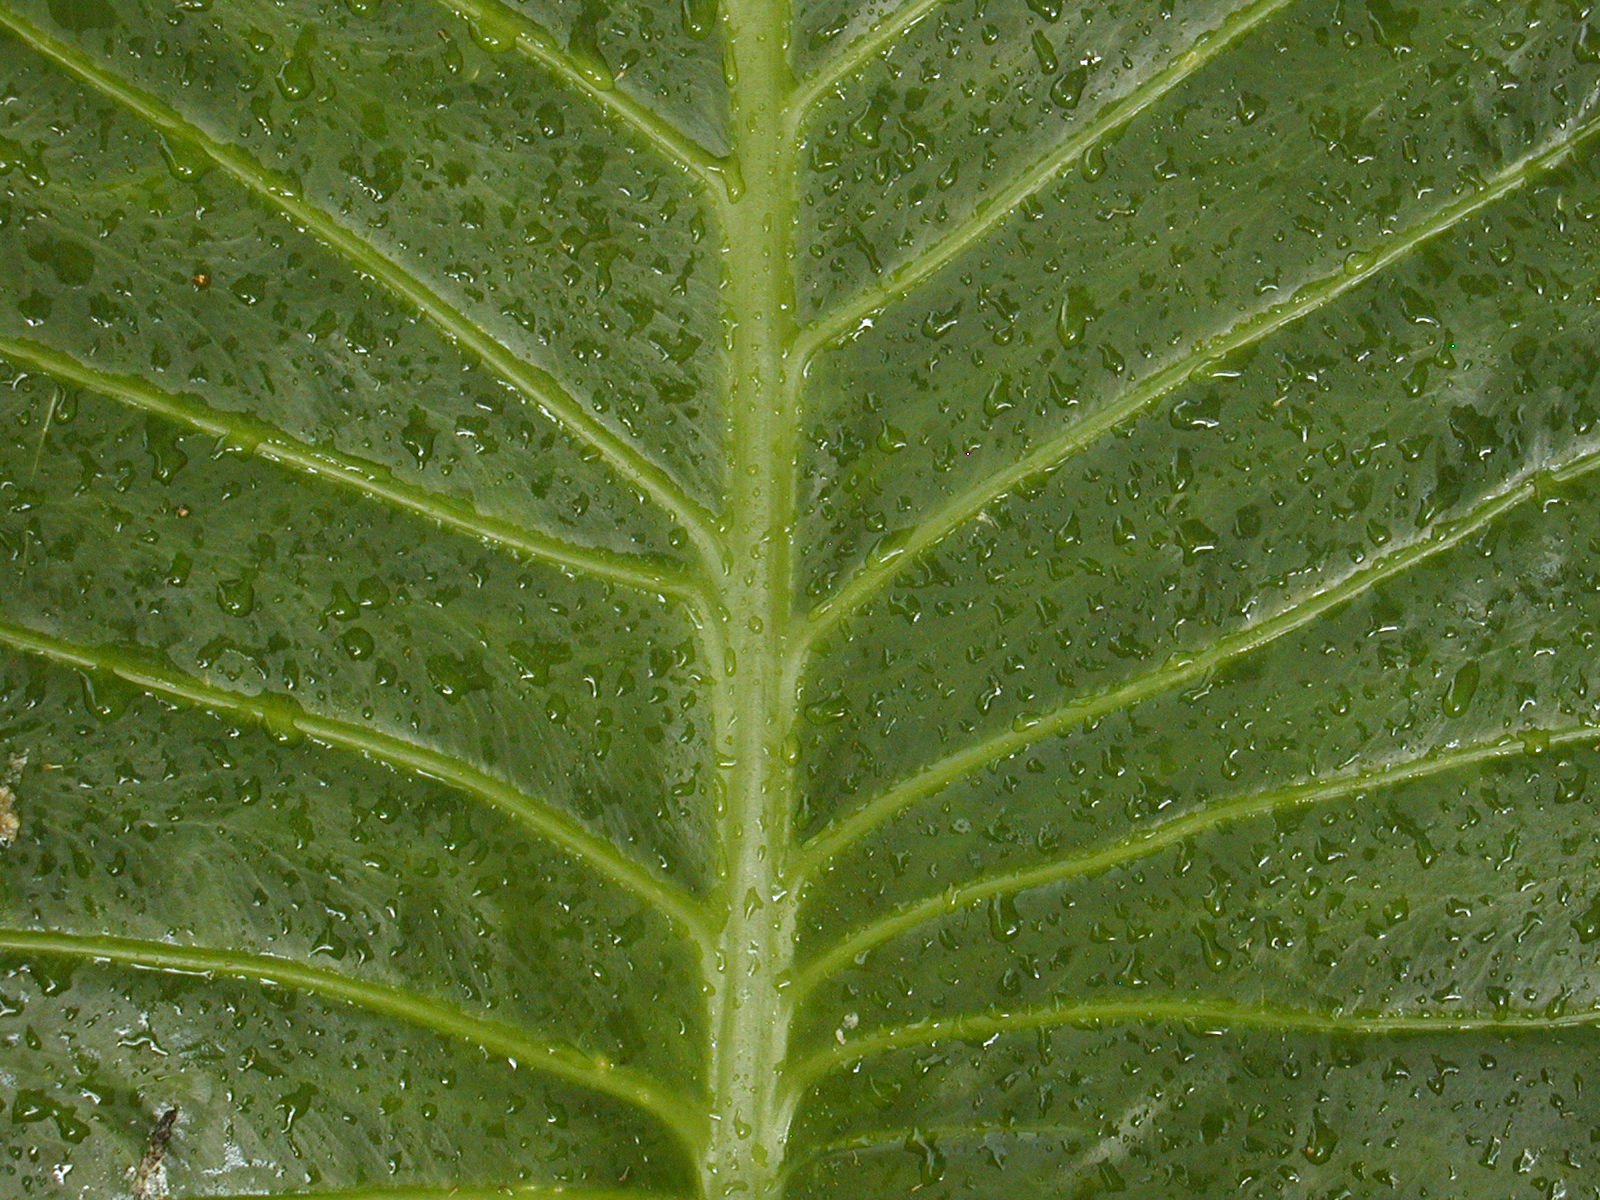 close up of a large leaf with water droplets on it